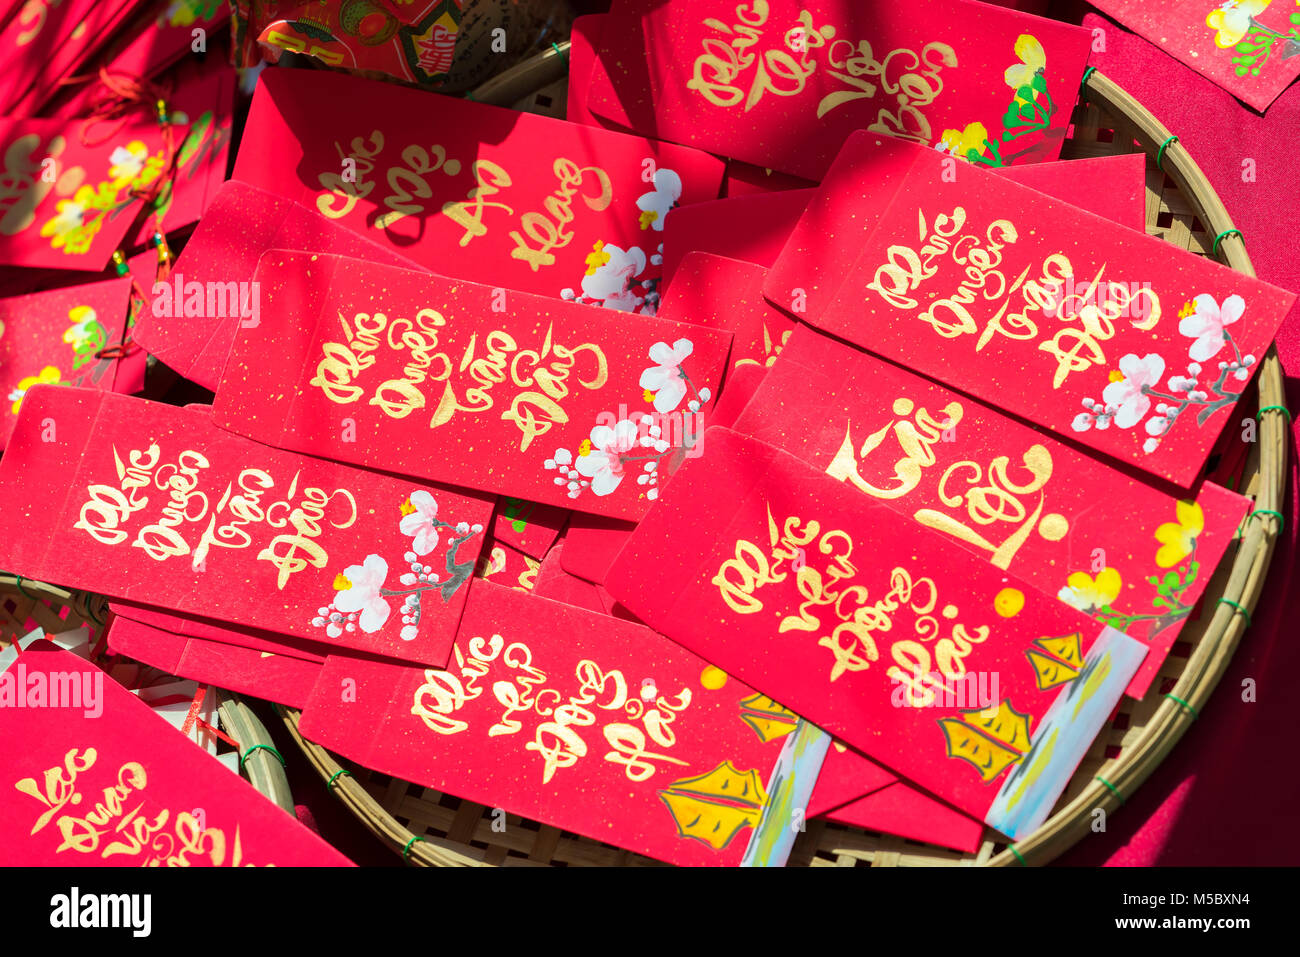 Red envelopes Lunar New Year Calligraphy decorated with text 'Merit, fortune, longevity' in Vietnamese means anyone receives money from envelope Stock Photo